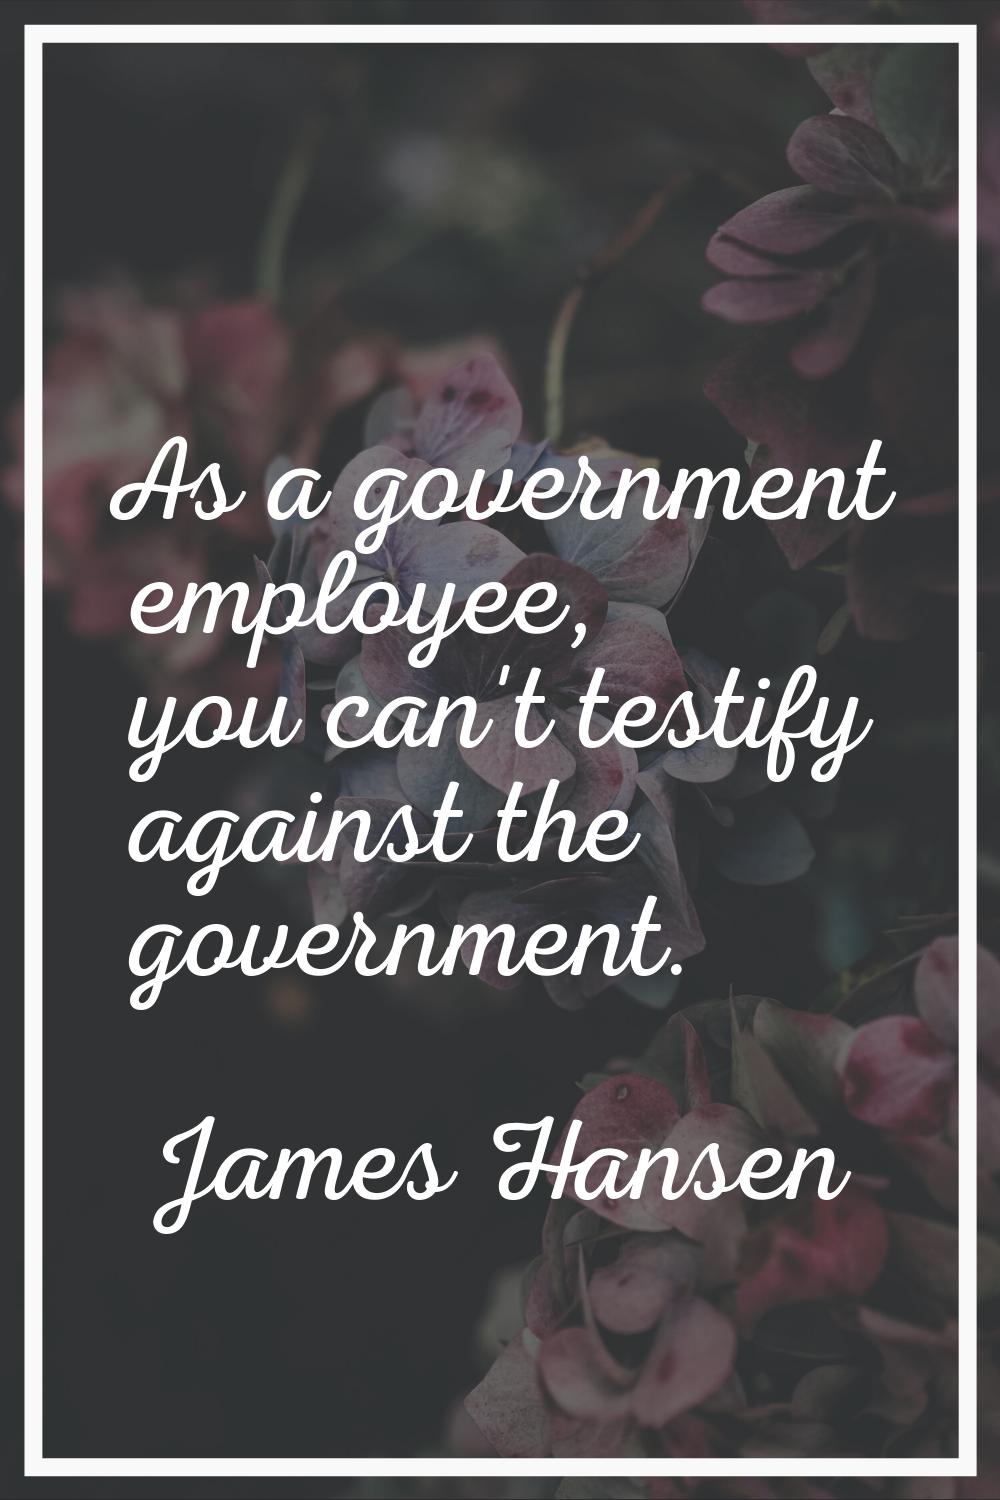 As a government employee, you can't testify against the government.